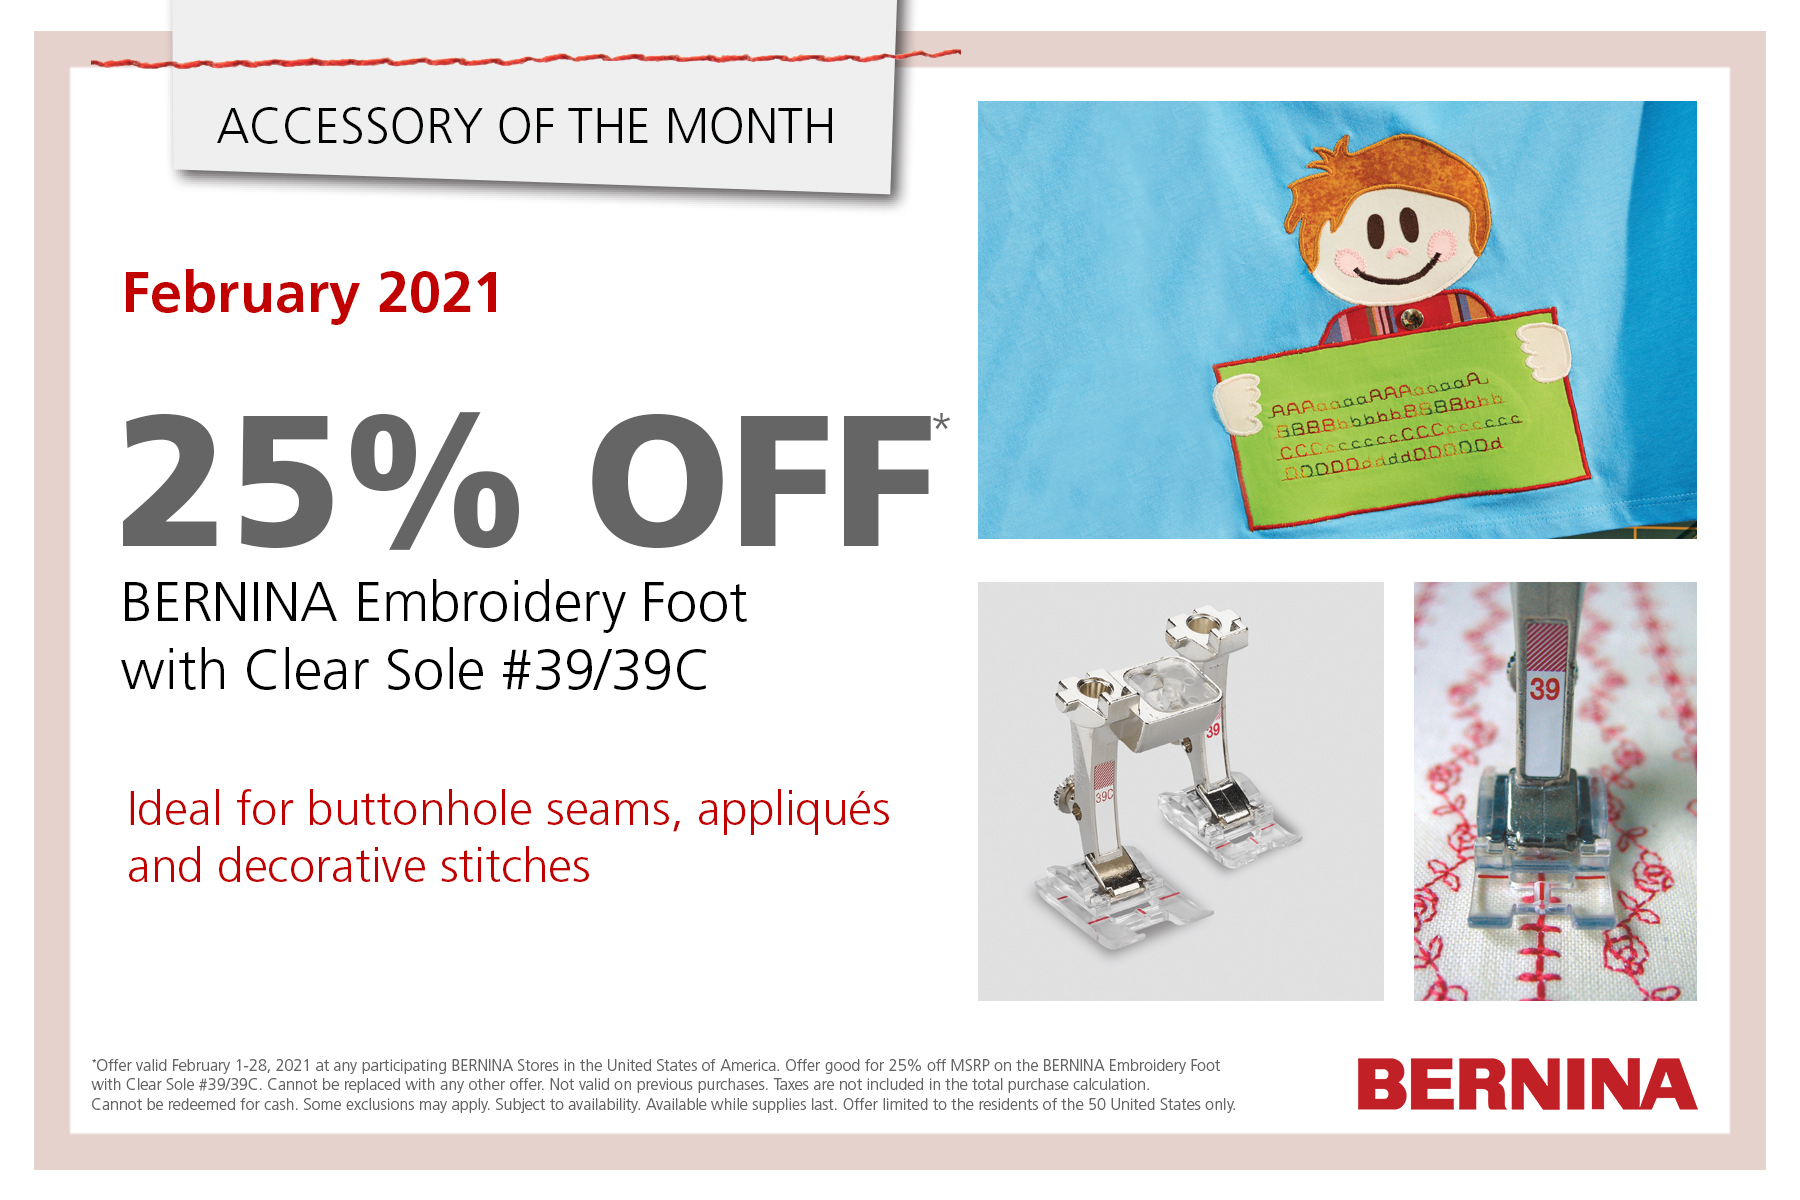 Best Foot Forward by Bernina Promotion at The Sewing Center in Rapid City, South Dakota